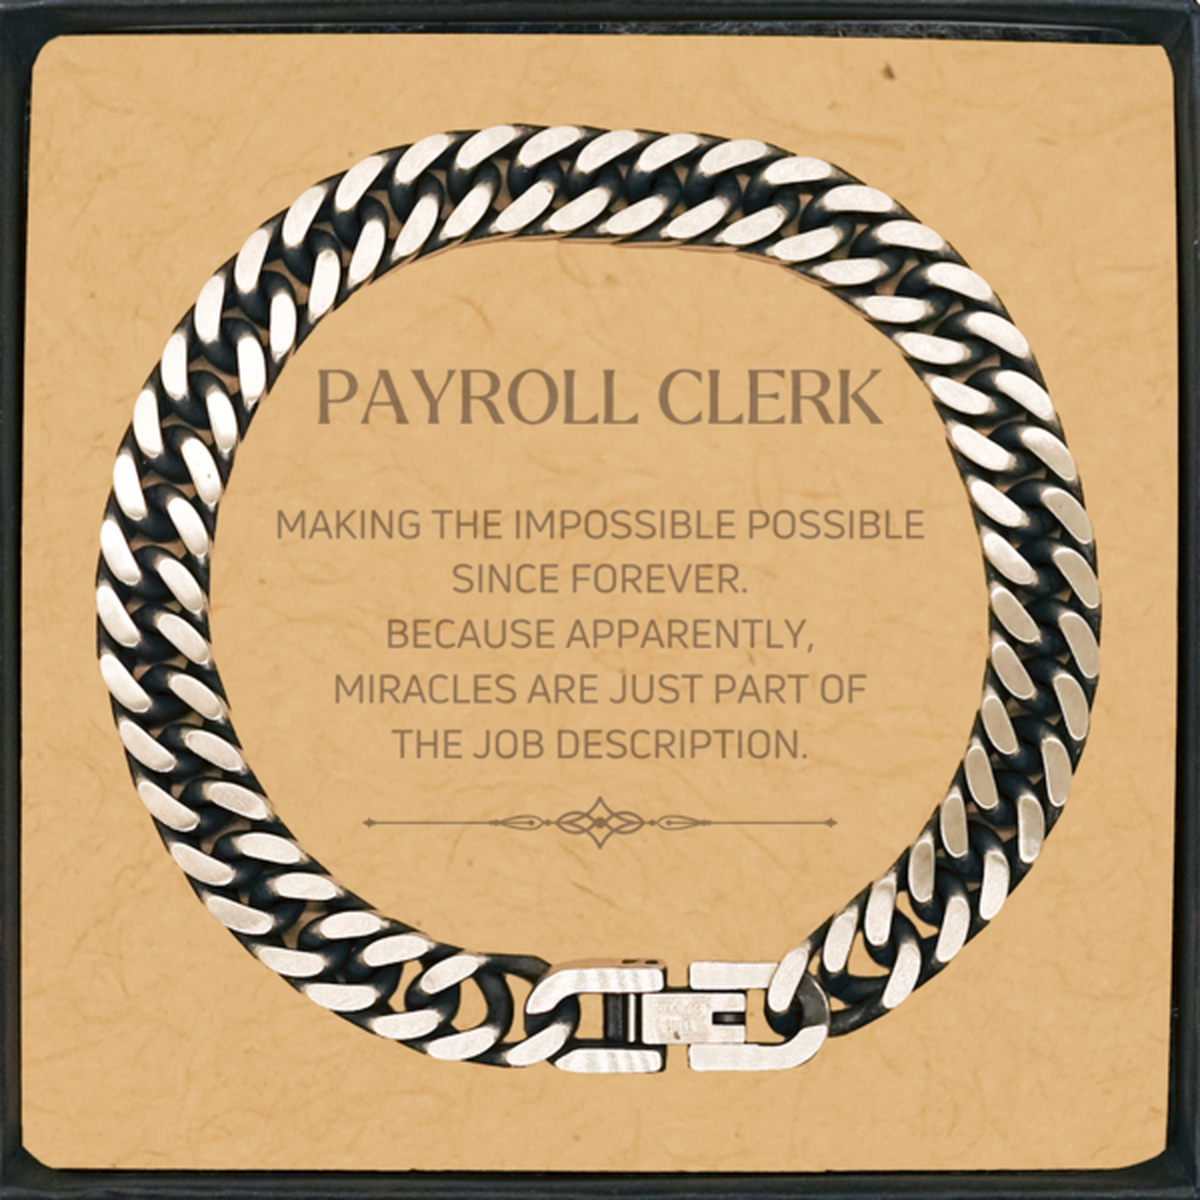 Funny Payroll Clerk Gifts, Miracles are just part of the job description, Inspirational Birthday Cuban Link Chain Bracelet For Payroll Clerk, Men, Women, Coworkers, Friends, Boss